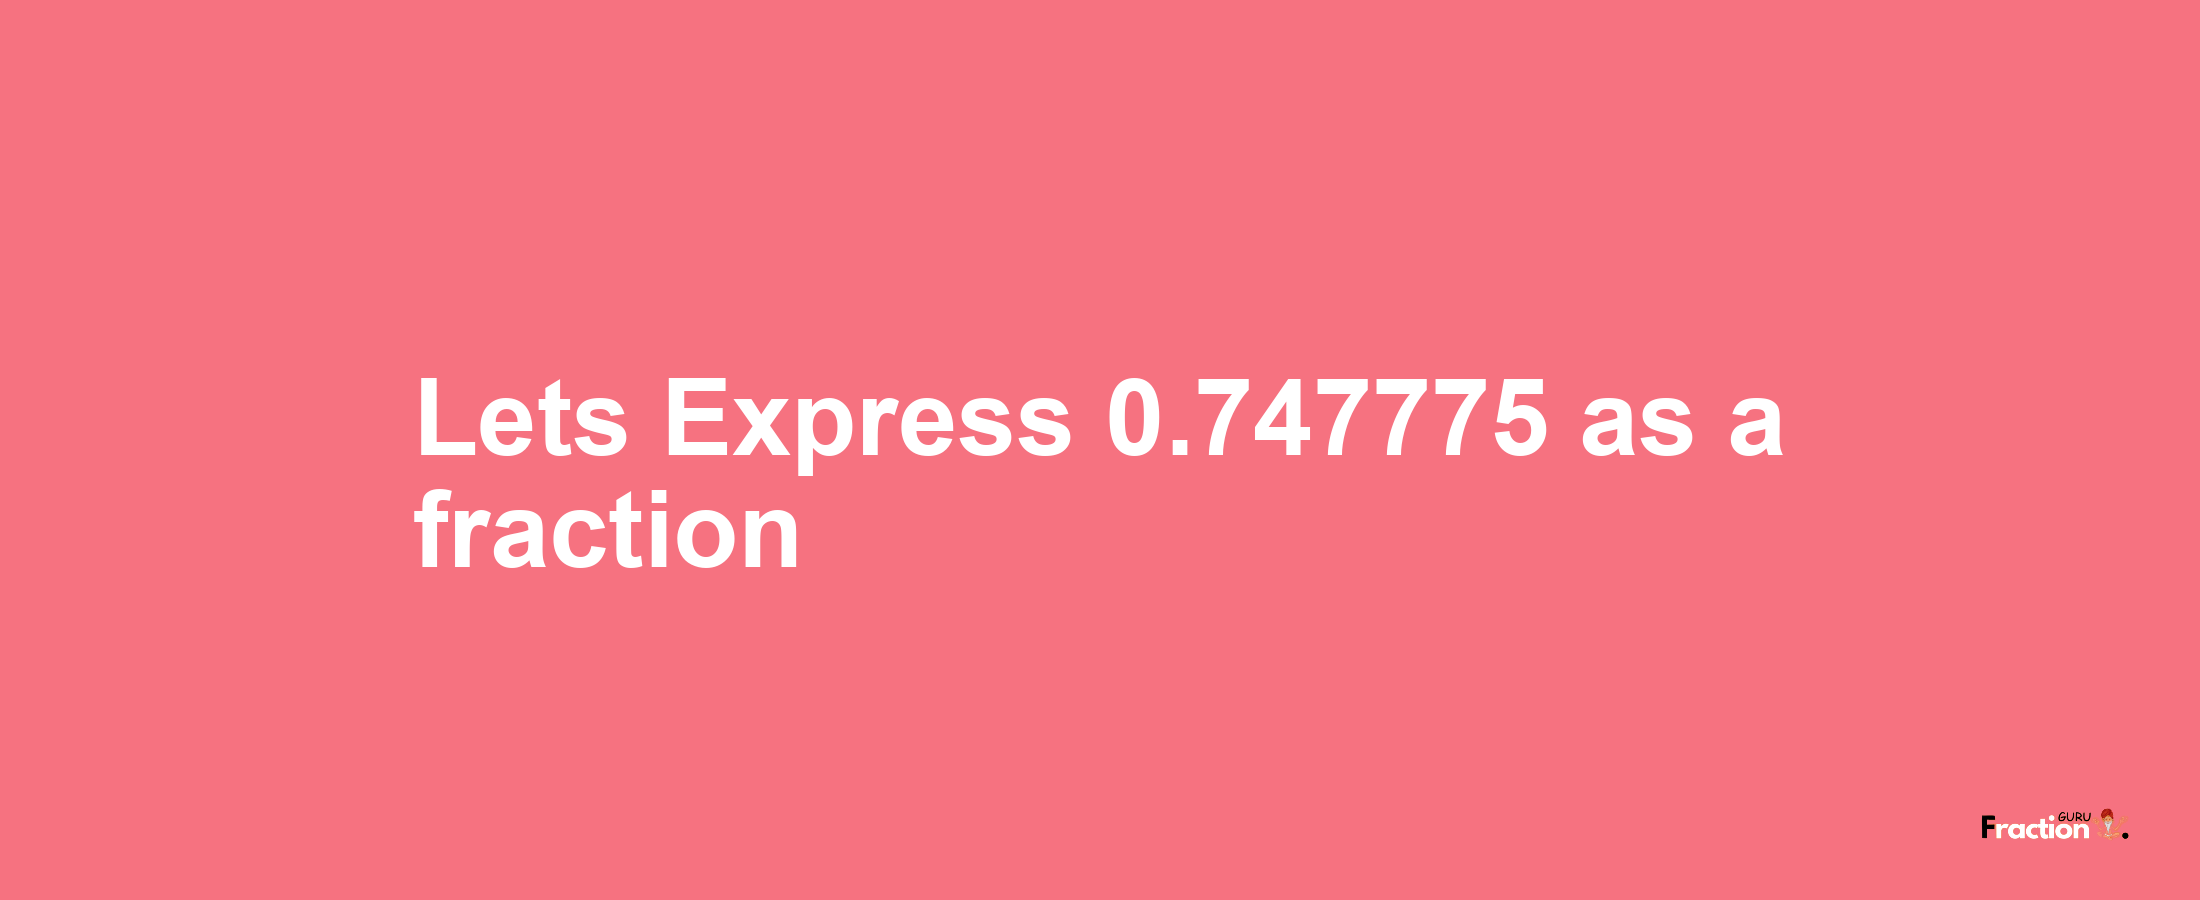 Lets Express 0.747775 as afraction